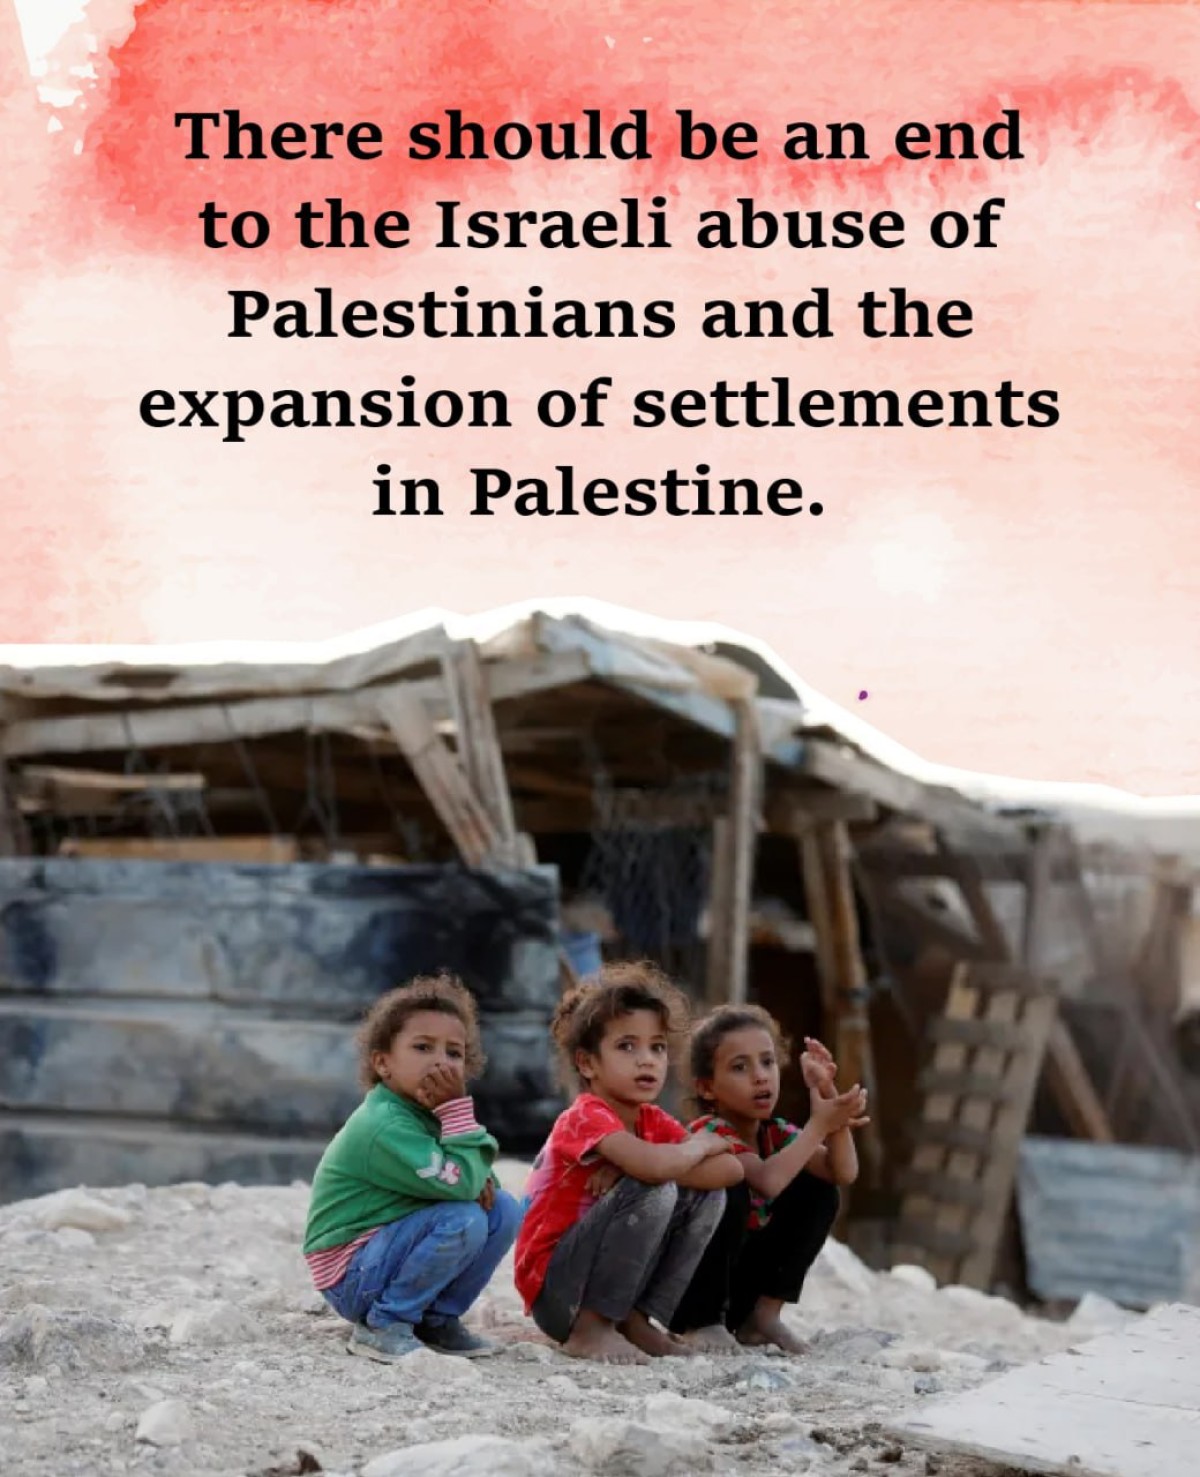 There should be an end to the Israeli abuse of Palestinians and the expansion of settlements in Palestine.